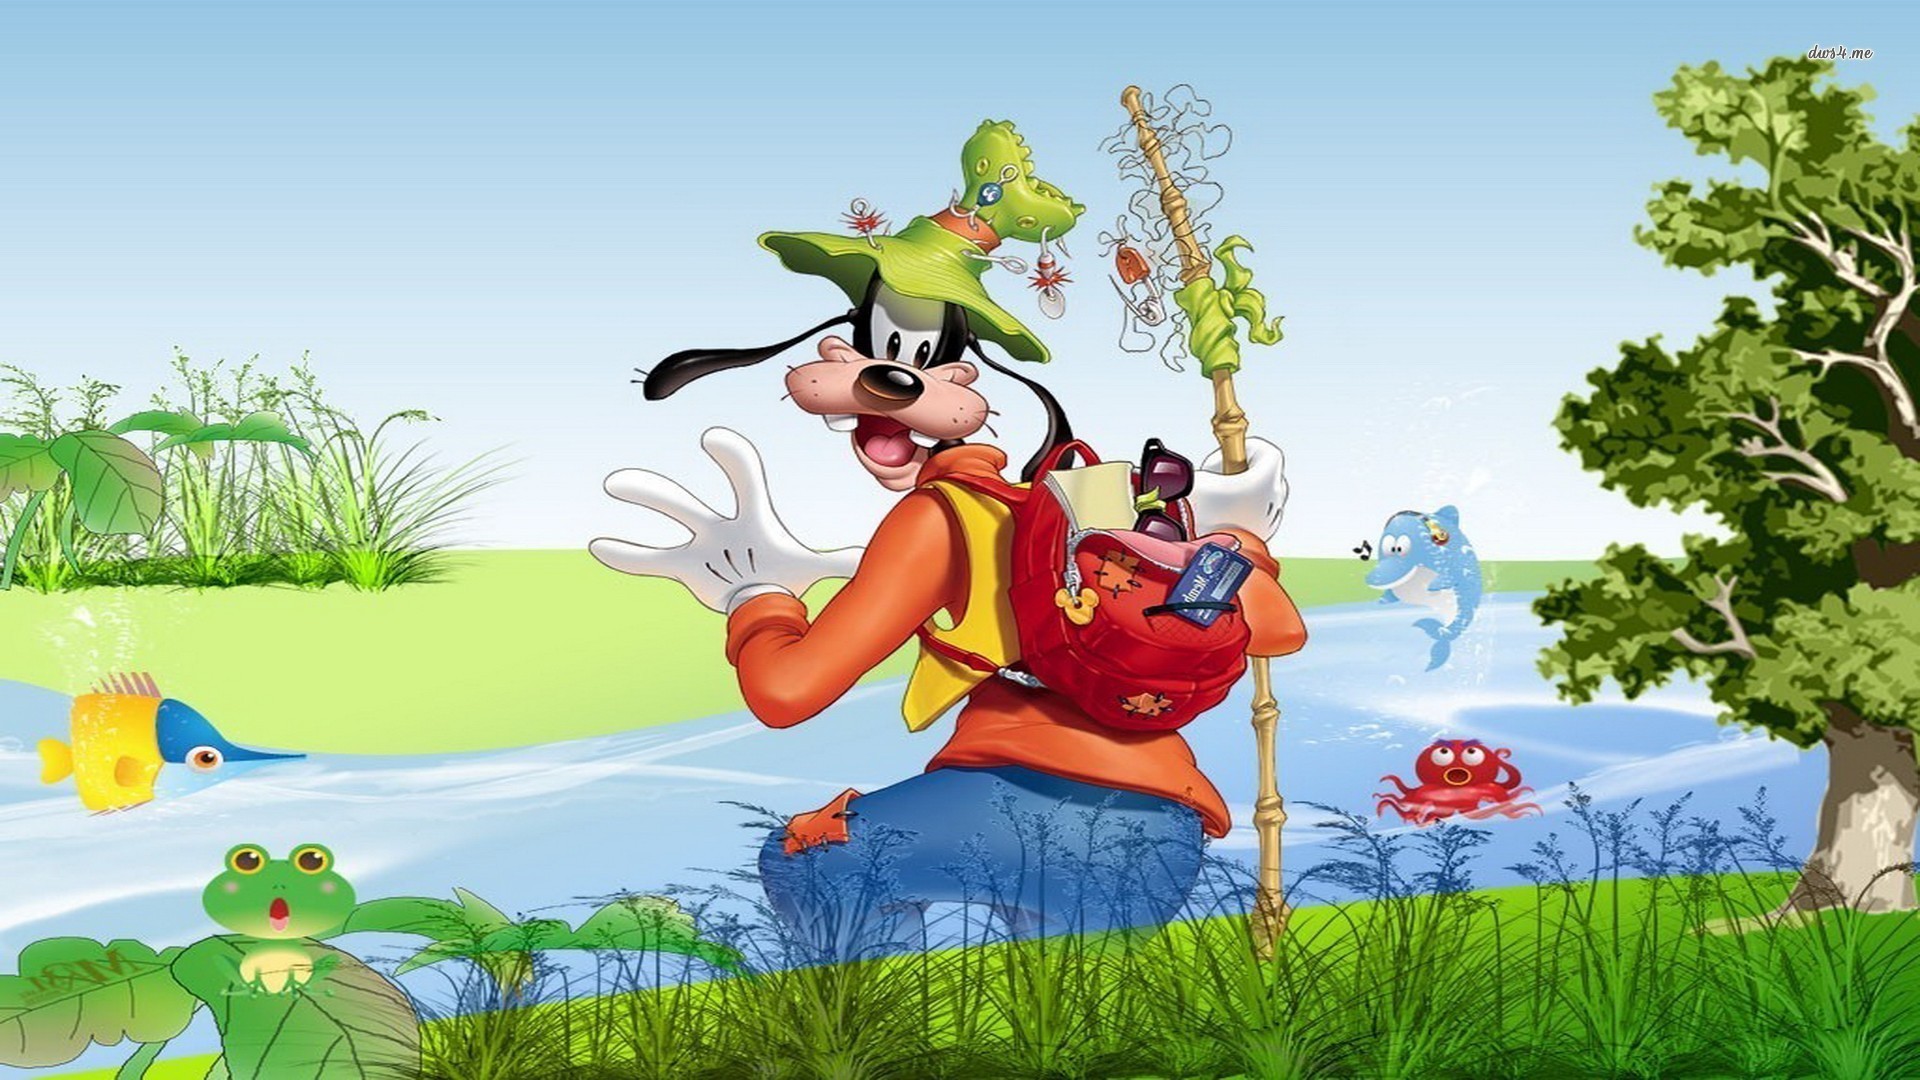 Quality HD Goofy Image Wallpaper For